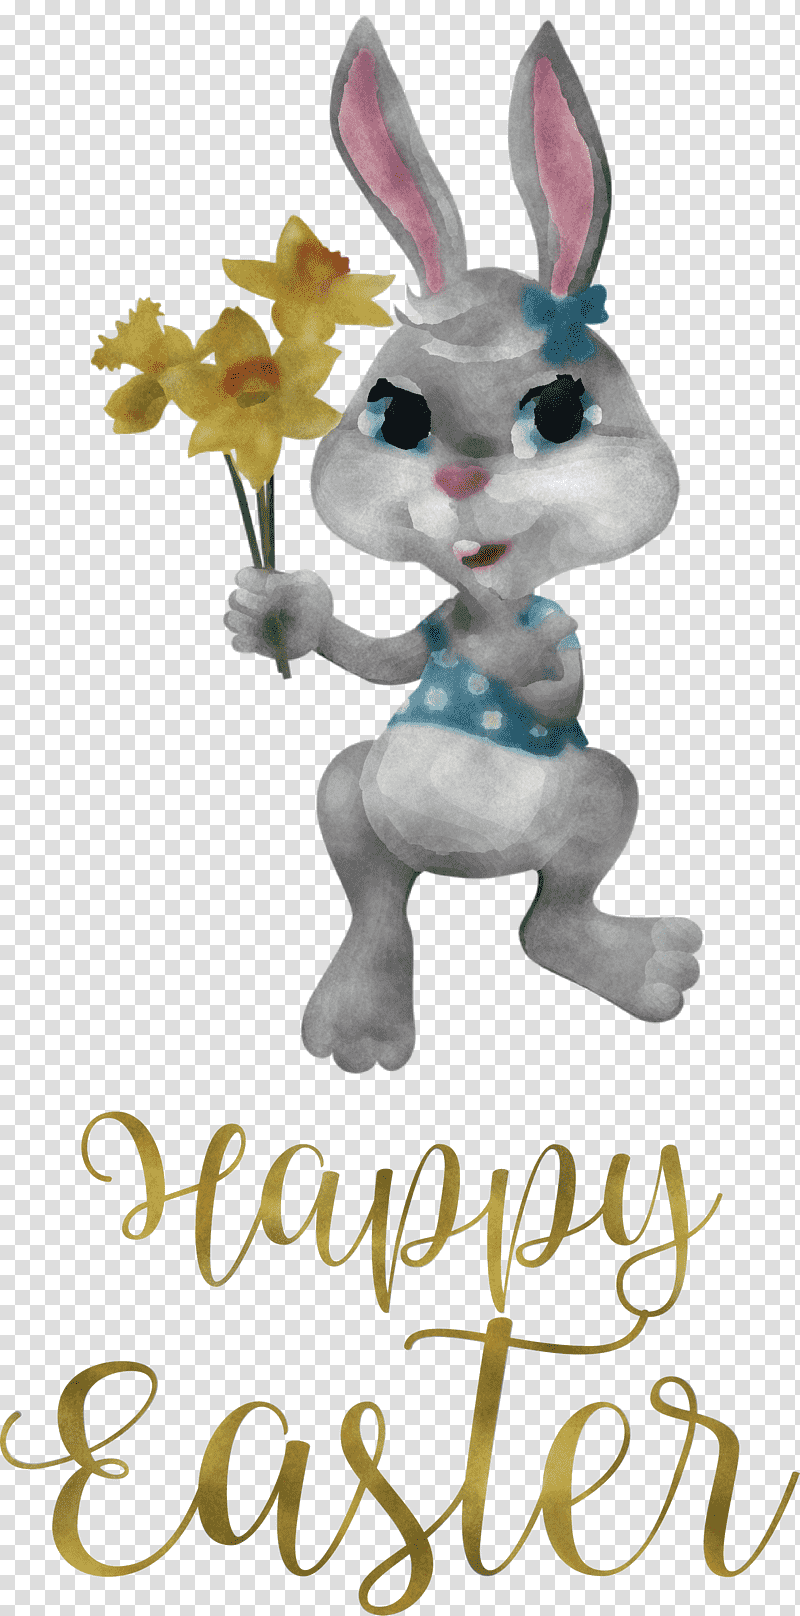 Happy Easter Day Easter Day Blessing easter bunny, Cute Easter, Easter Egg, Basket, Easter Basket, Hare, Christmas Day transparent background PNG clipart